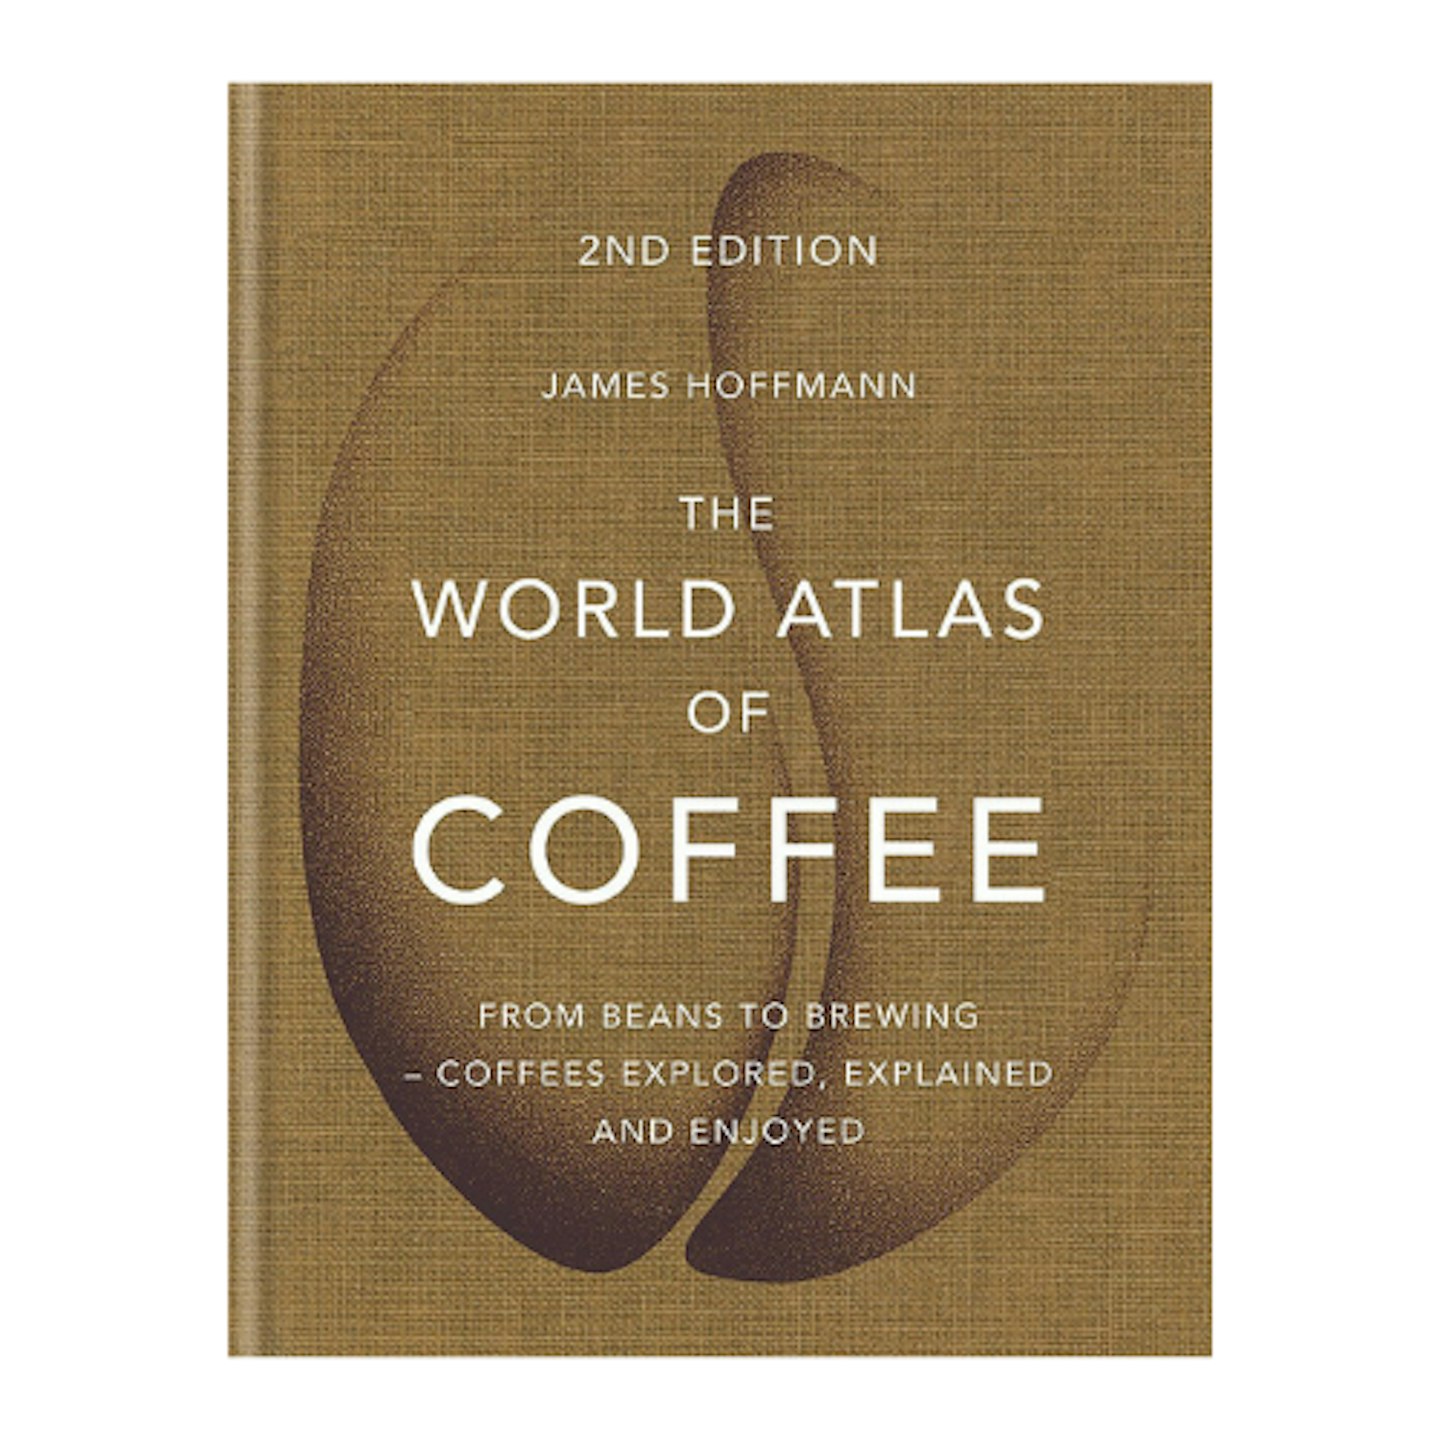 The World Atlas of Coffee on white background